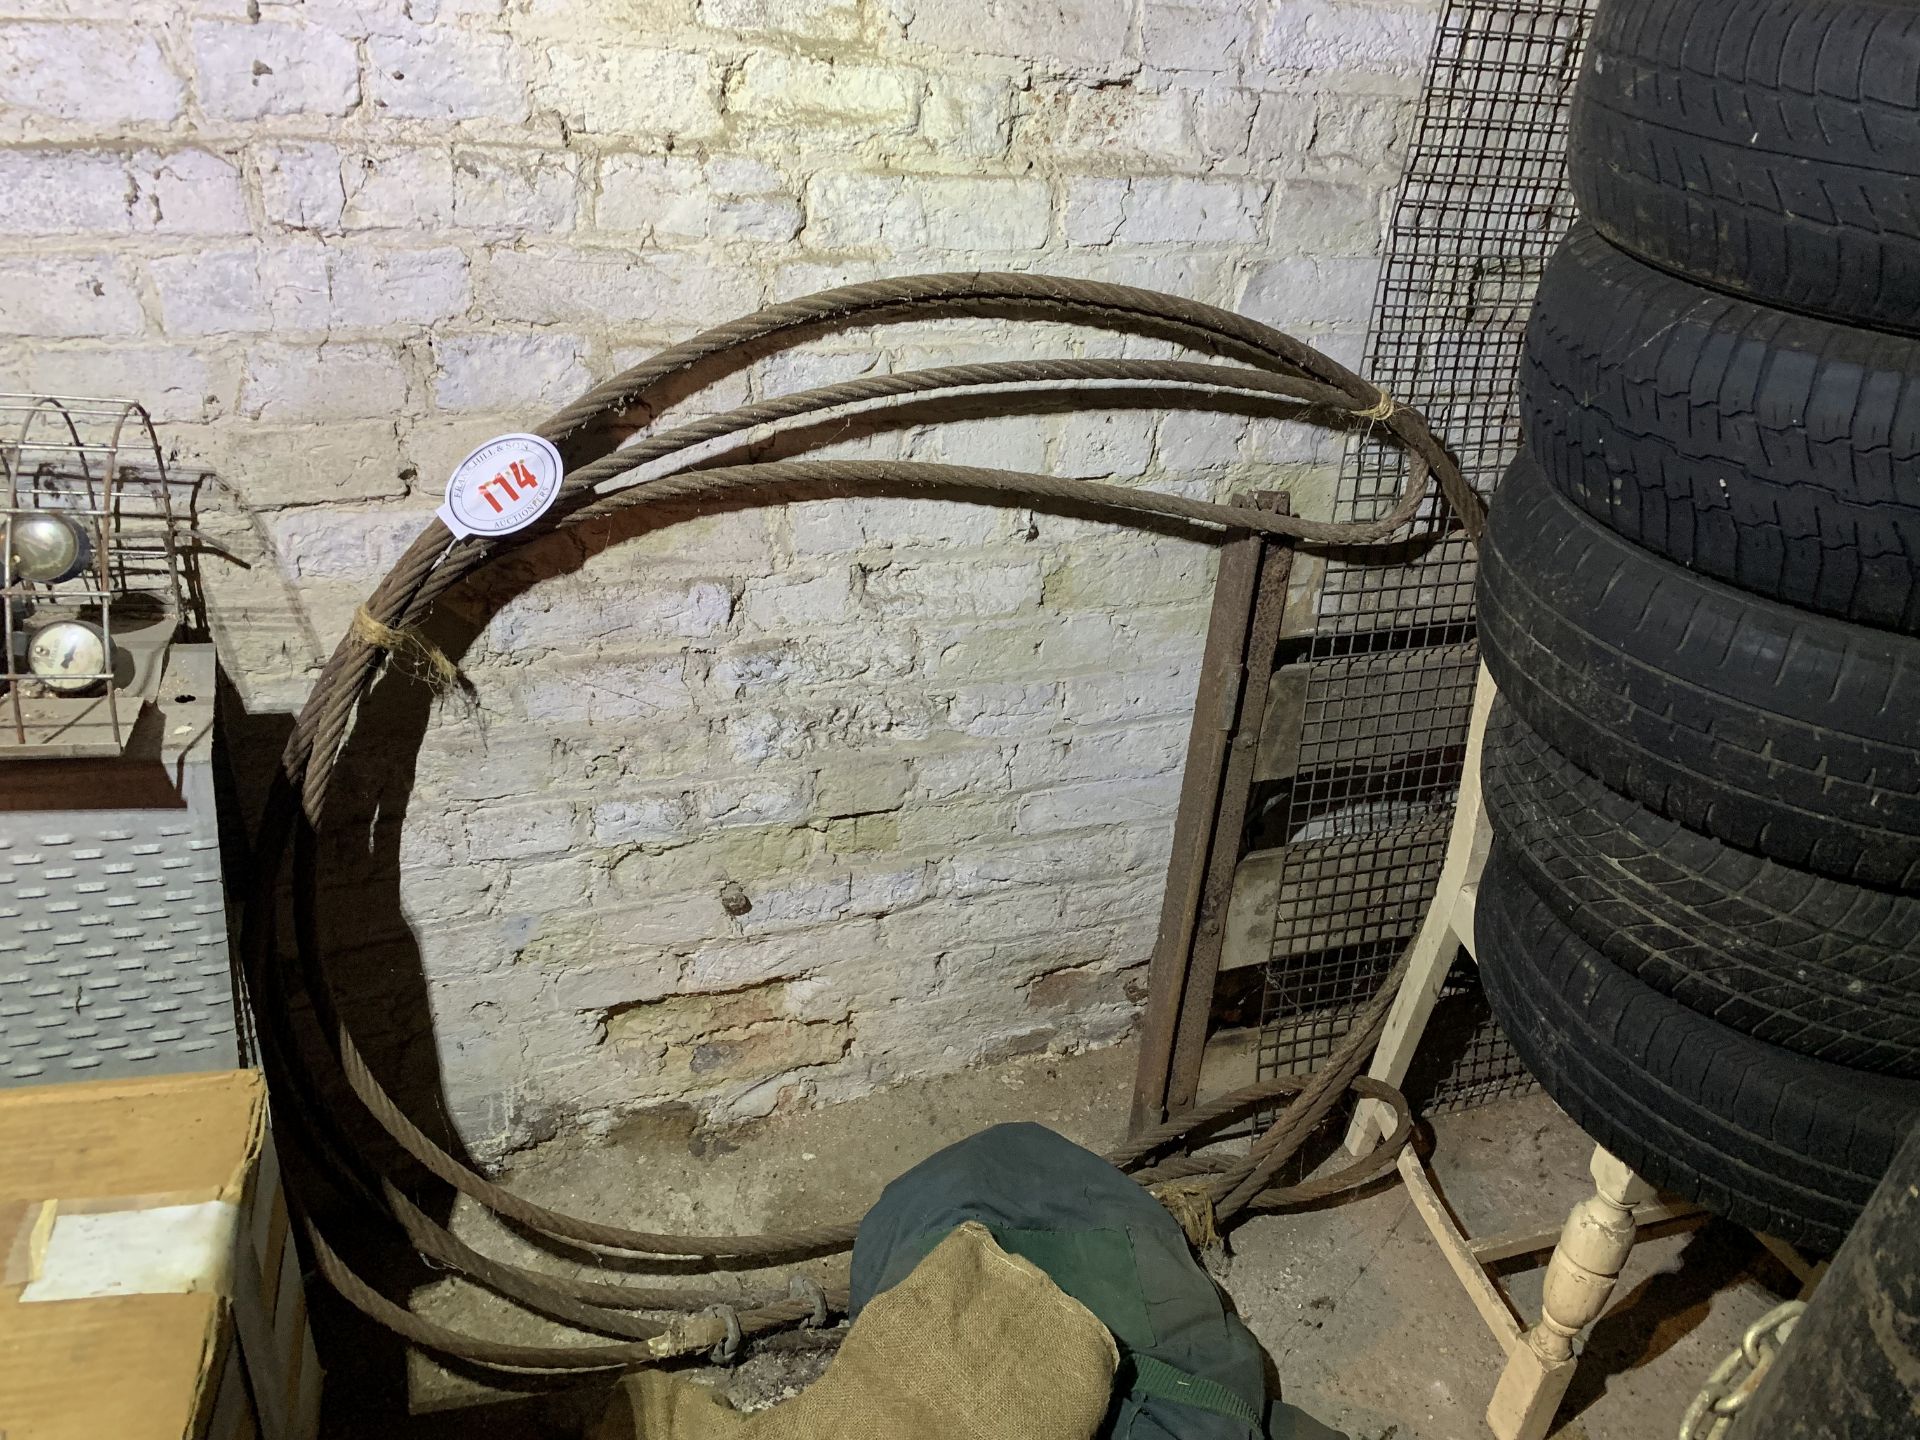 Wire tow rope